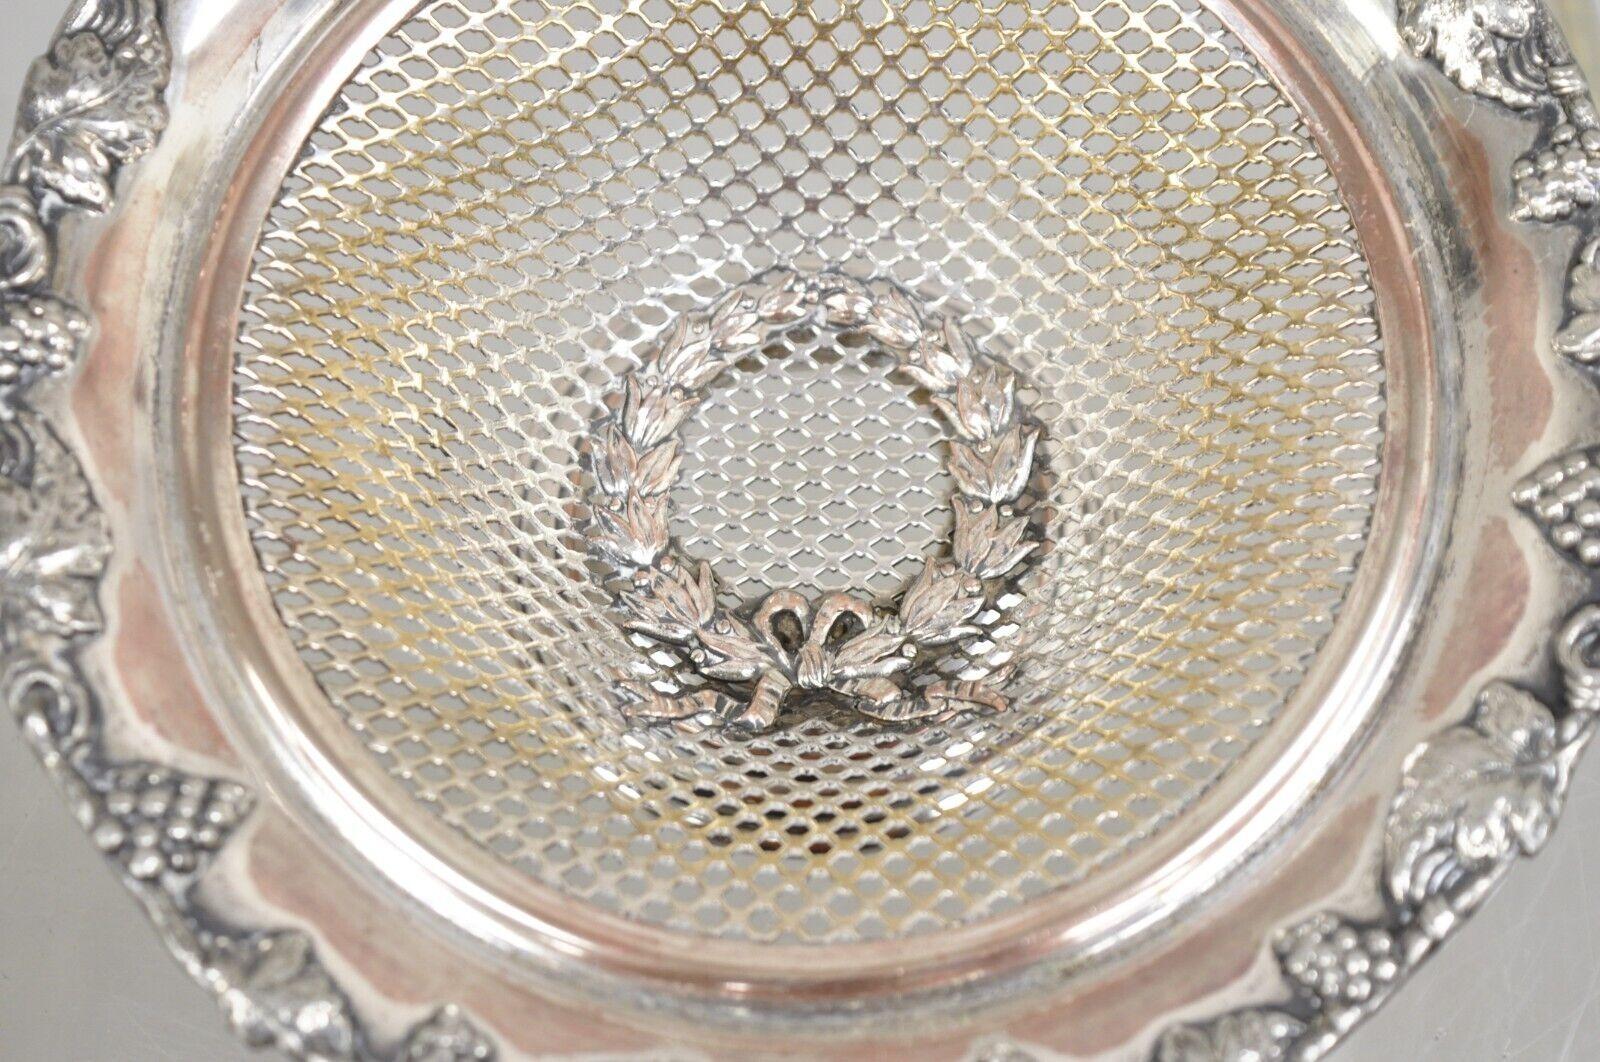 English Edwardian Silver Plated Wreath Design Small Mesh Basket Candy Dish -Pair For Sale 3